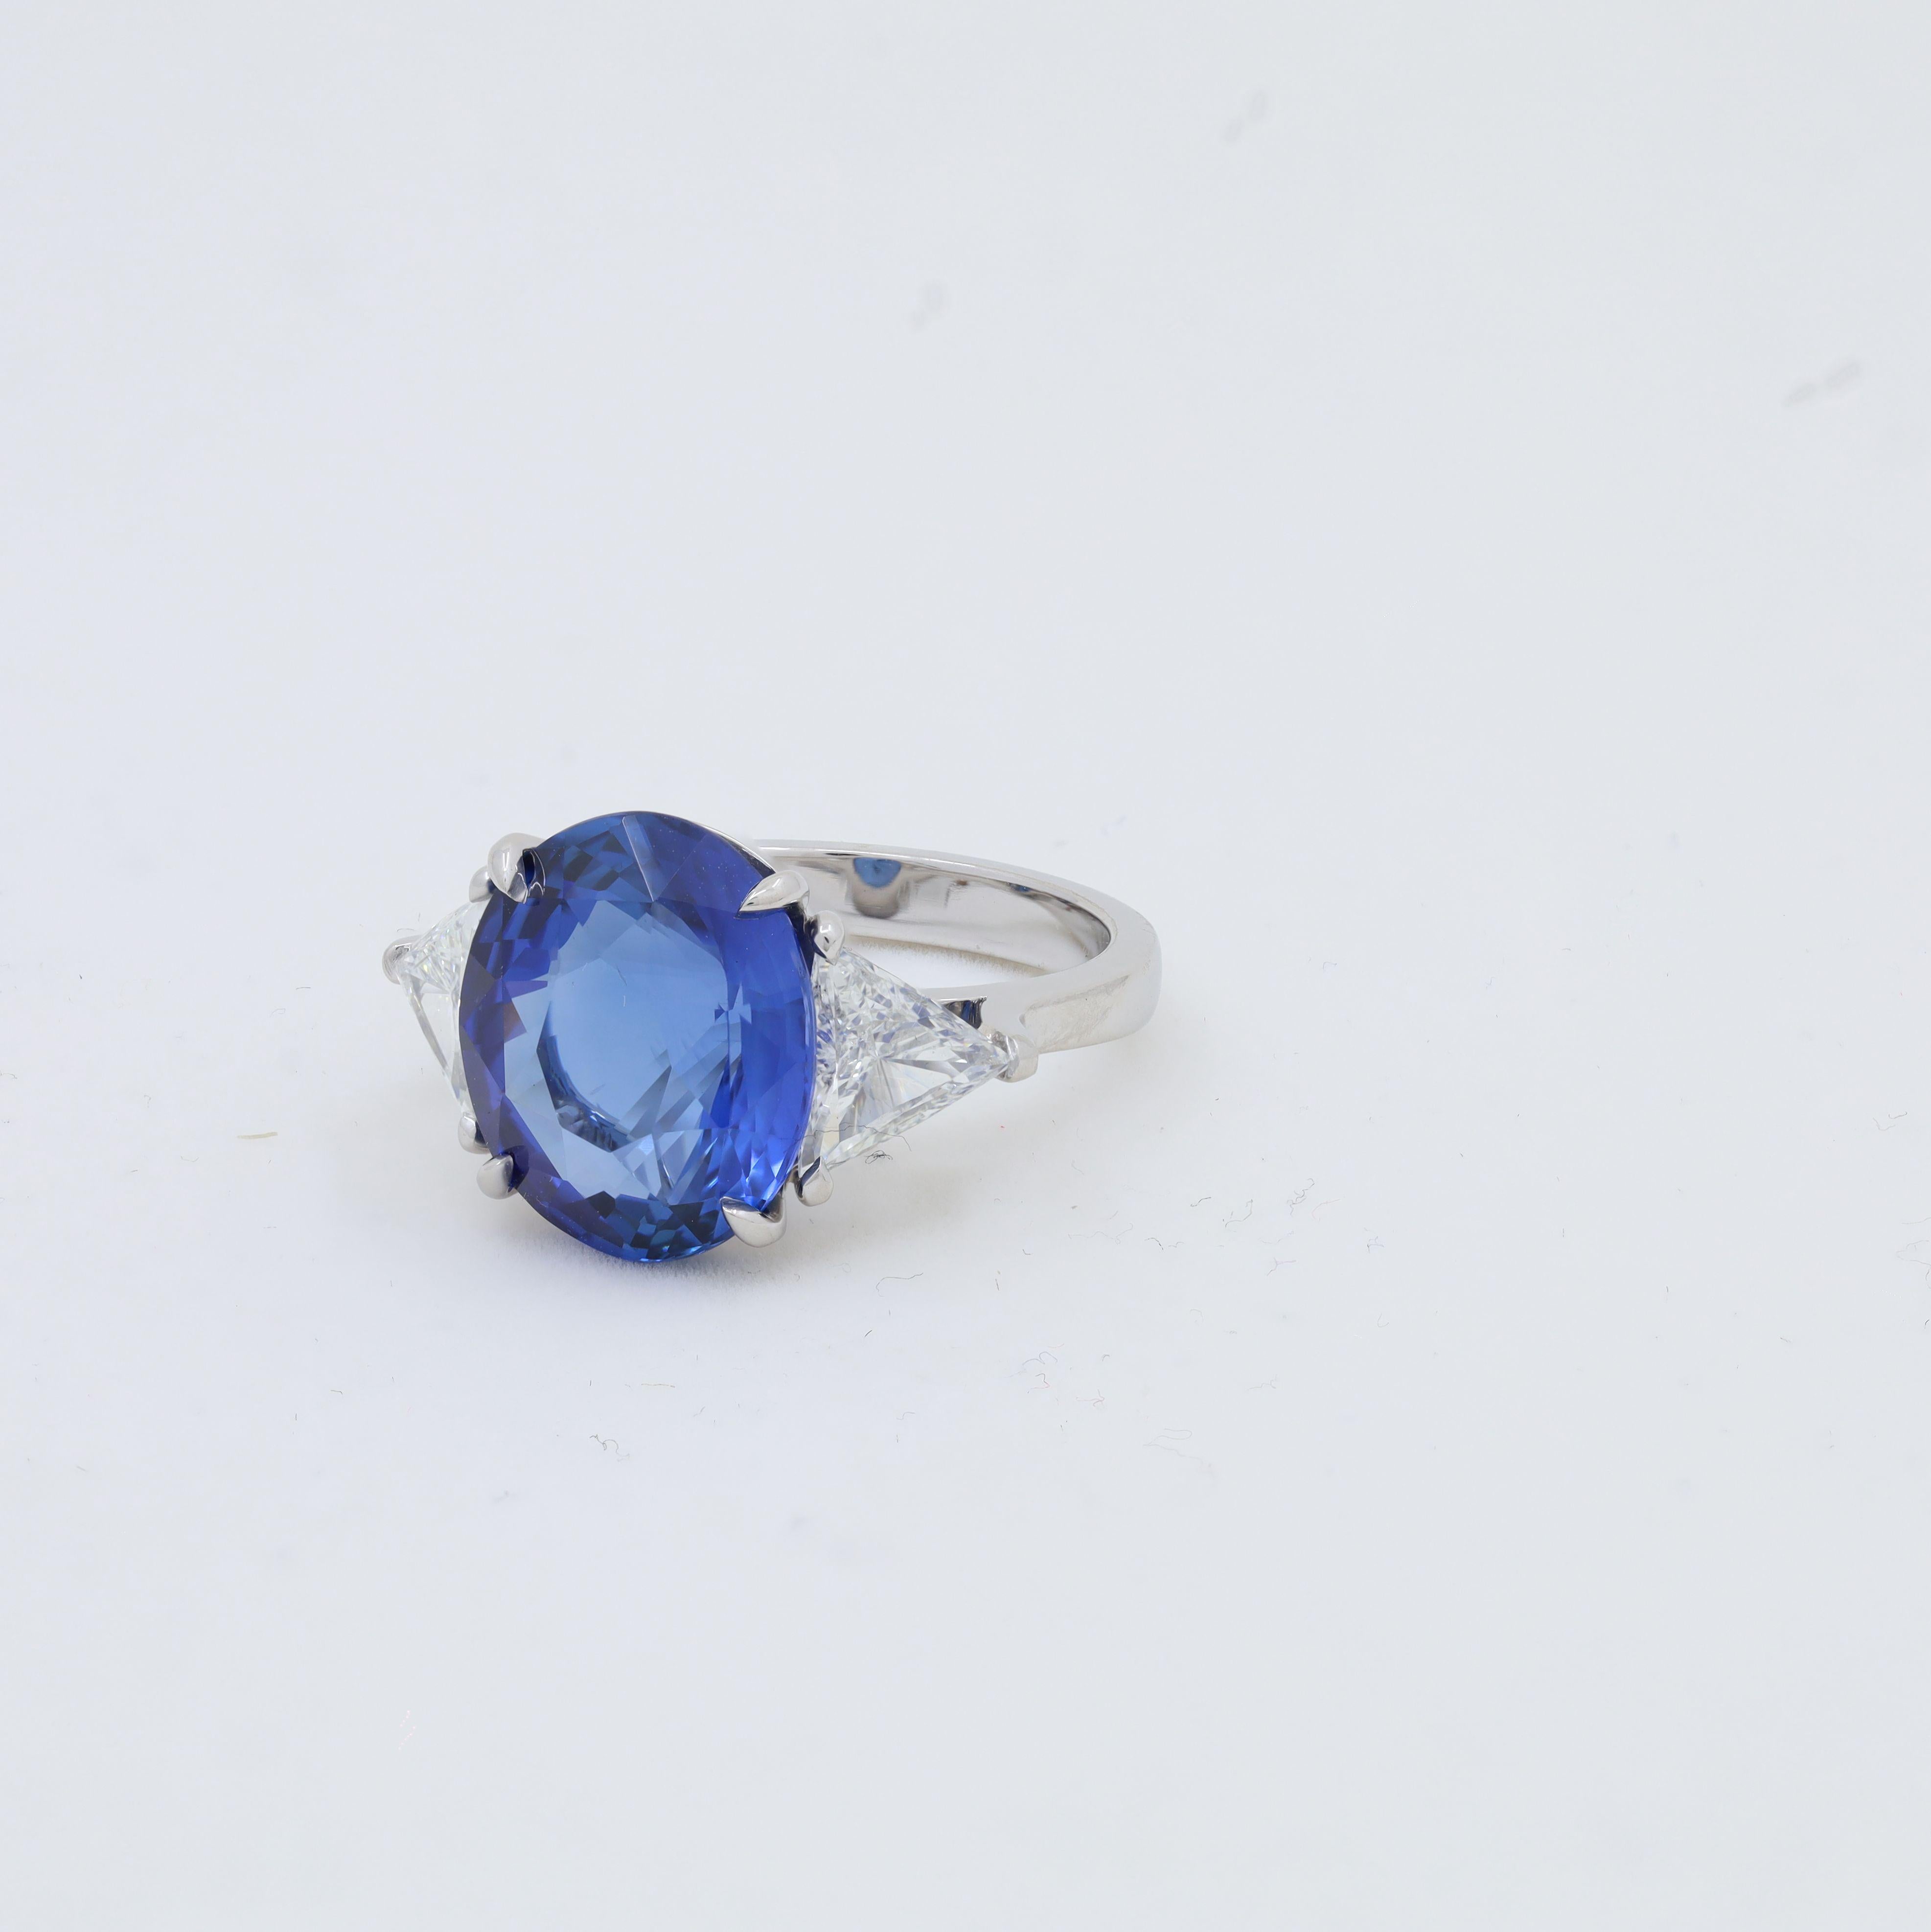 Platinum sapphire and diamond ring featuring an 8.51 ct oval certified Sri Lanka natural Ceylon blue sapphire with 2 triangle cut diamonds on its side totaling 1.27 cts of diamonds C. DUNAIGRE certified.
Diana M. is a leading supplier of top-quality